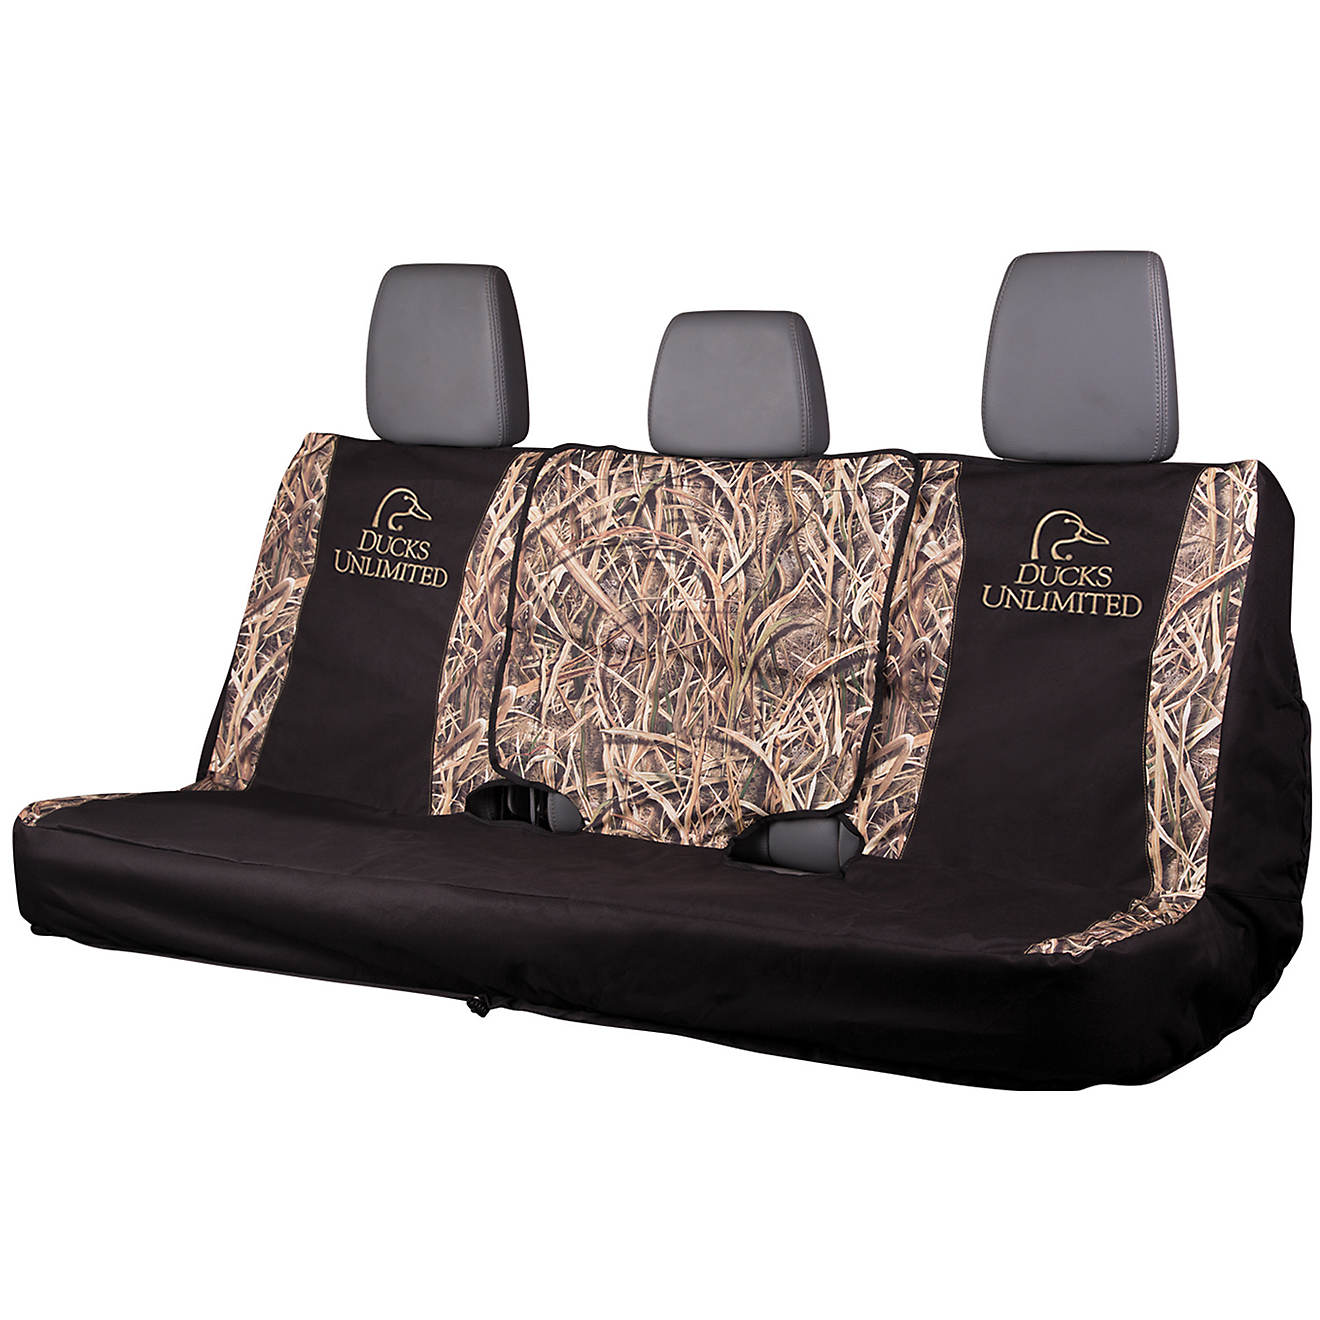 Ducks Unlimited Mossy Oak Camo FS Bench Seat Cover                                                                               - view number 1